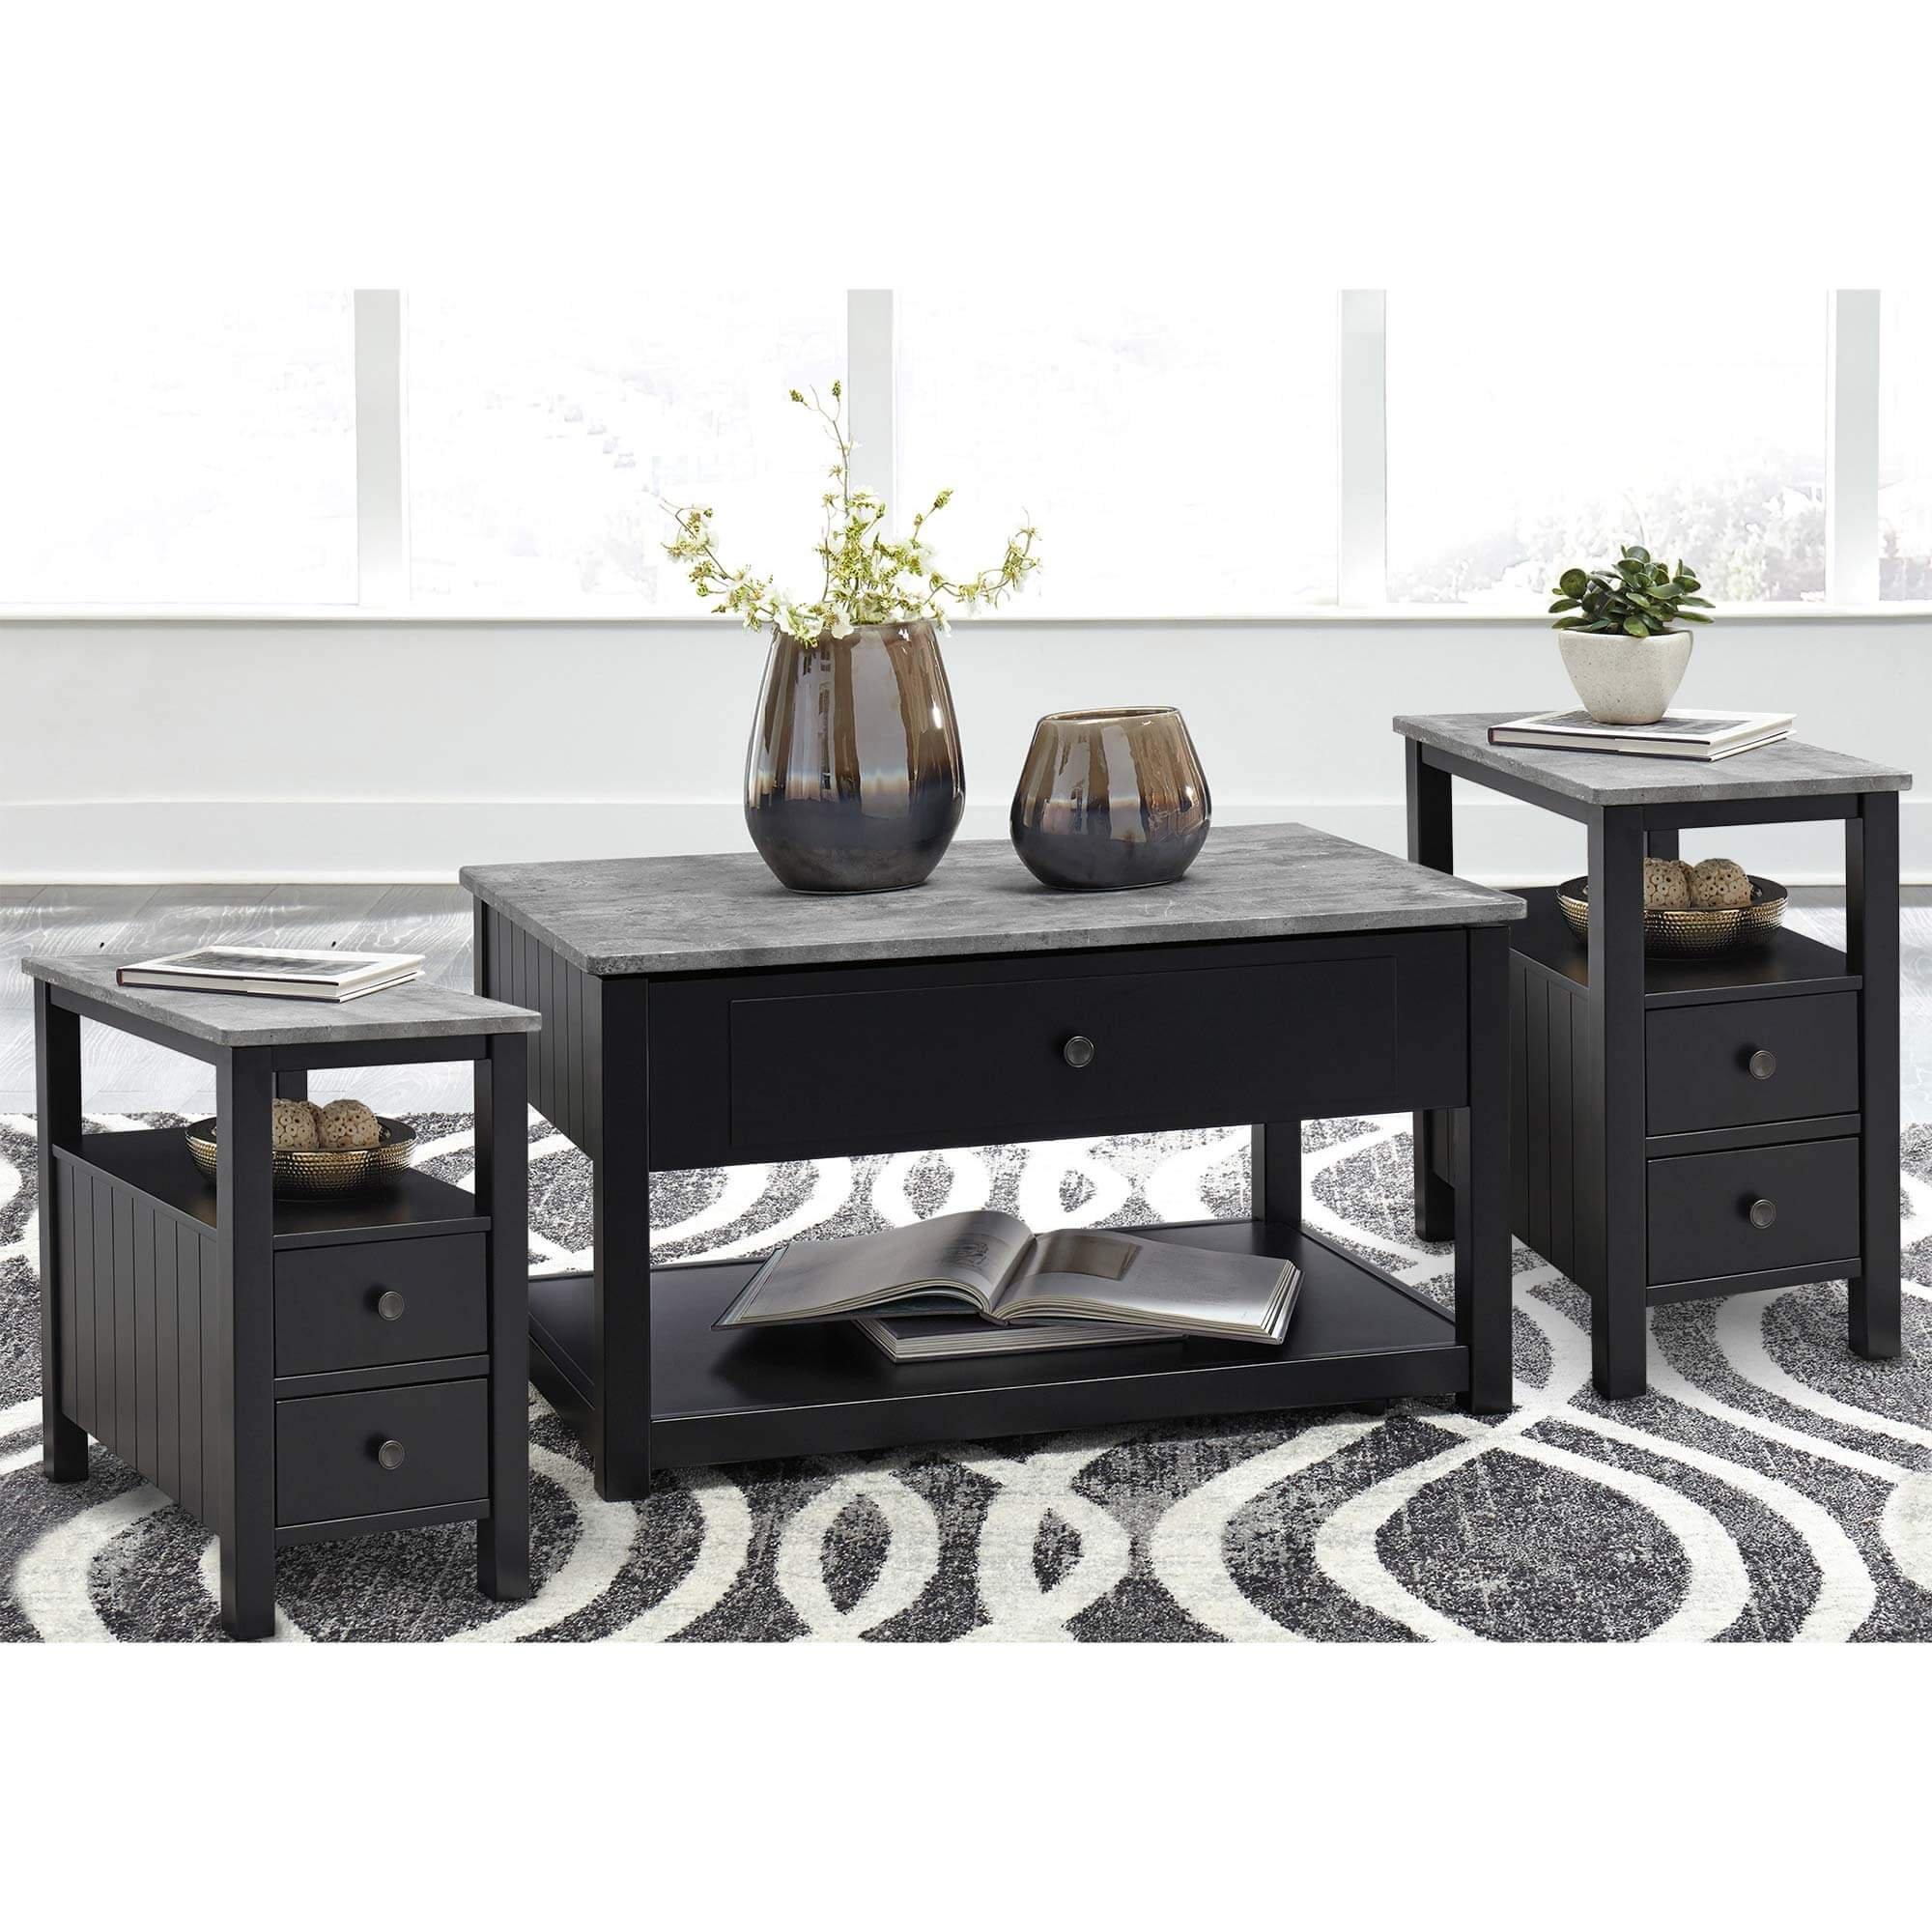 Grey Coffee Table Set - Good Quality Affordable 3 Piece Coffee Table Set Glass Top In Kitchener Waterloo And Cambridge Area Payless Furniture : Accent your living room with a coffee, console, sofa or end table.